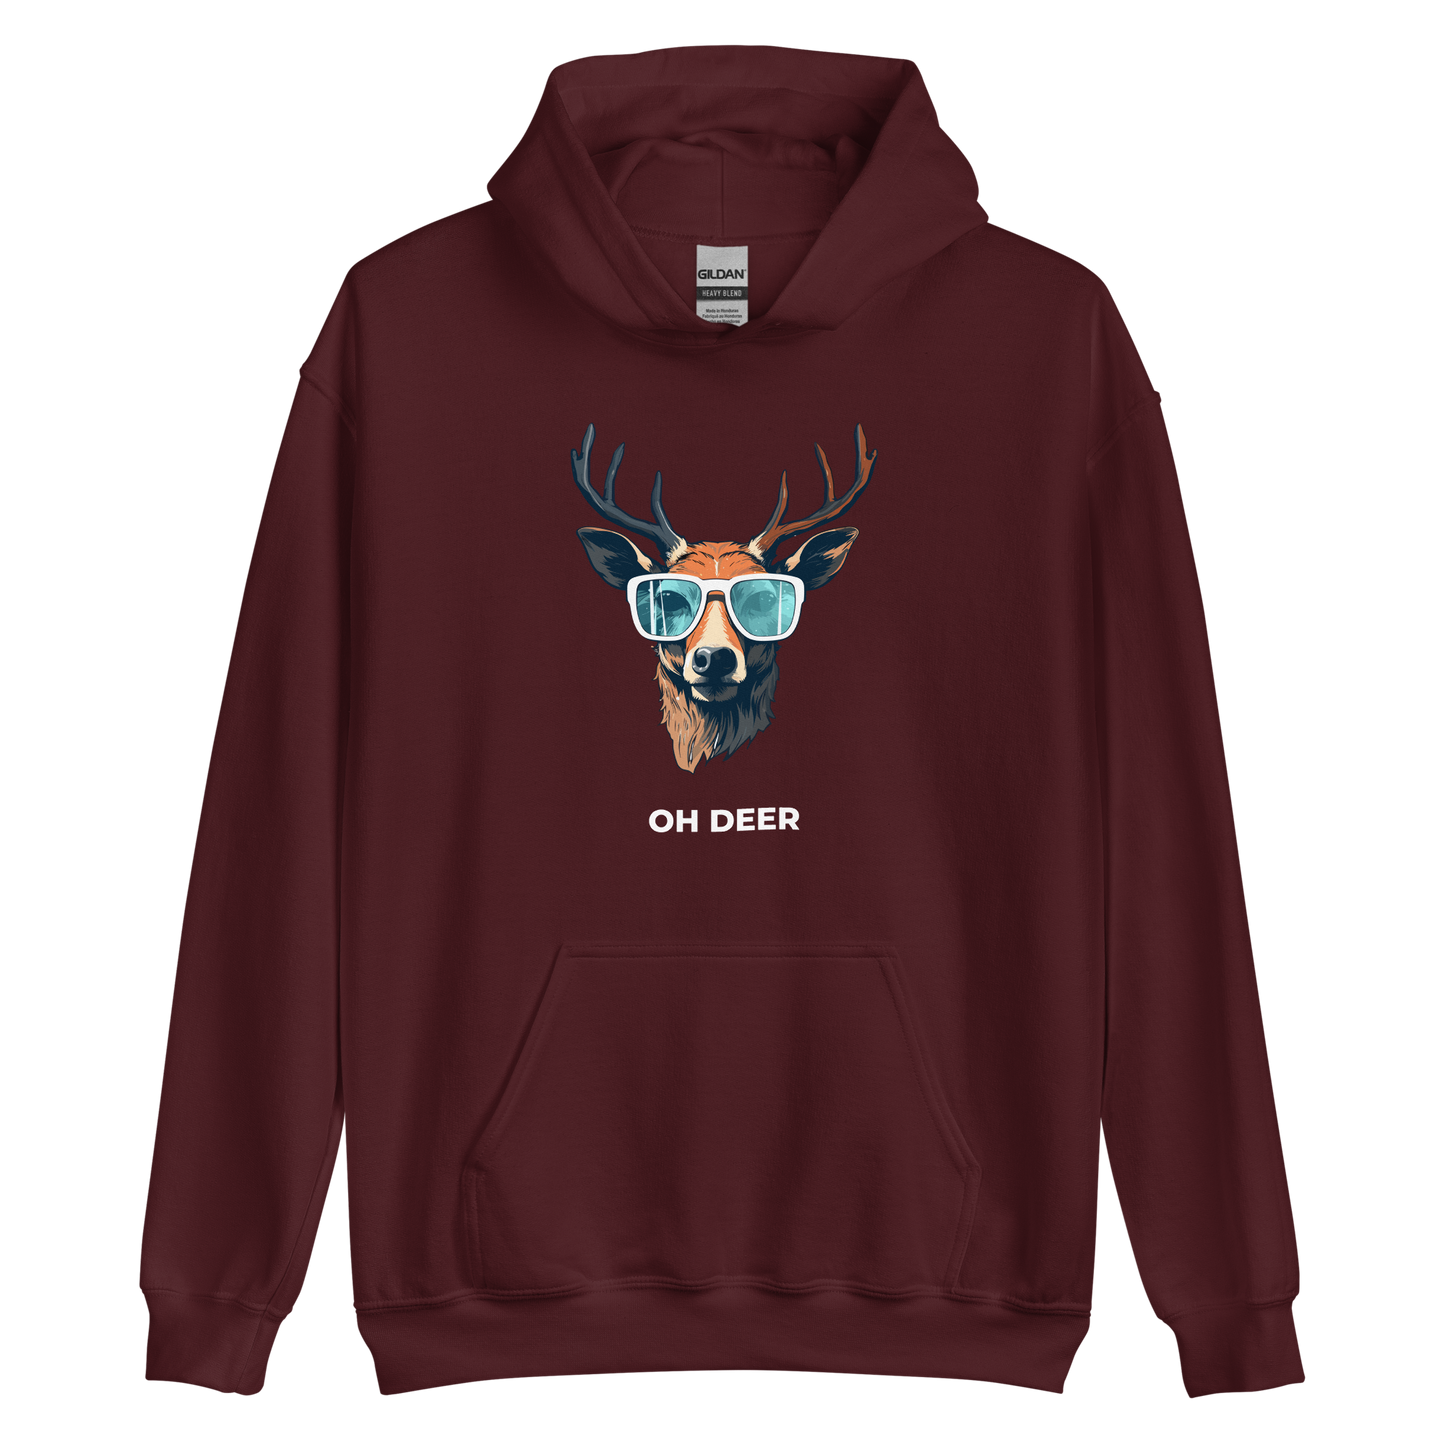 Maroon Deer Hoodie featuring a hilarious Oh Deer graphic on the chest - Funny Graphic Deer Hoodies - Boozy Fox